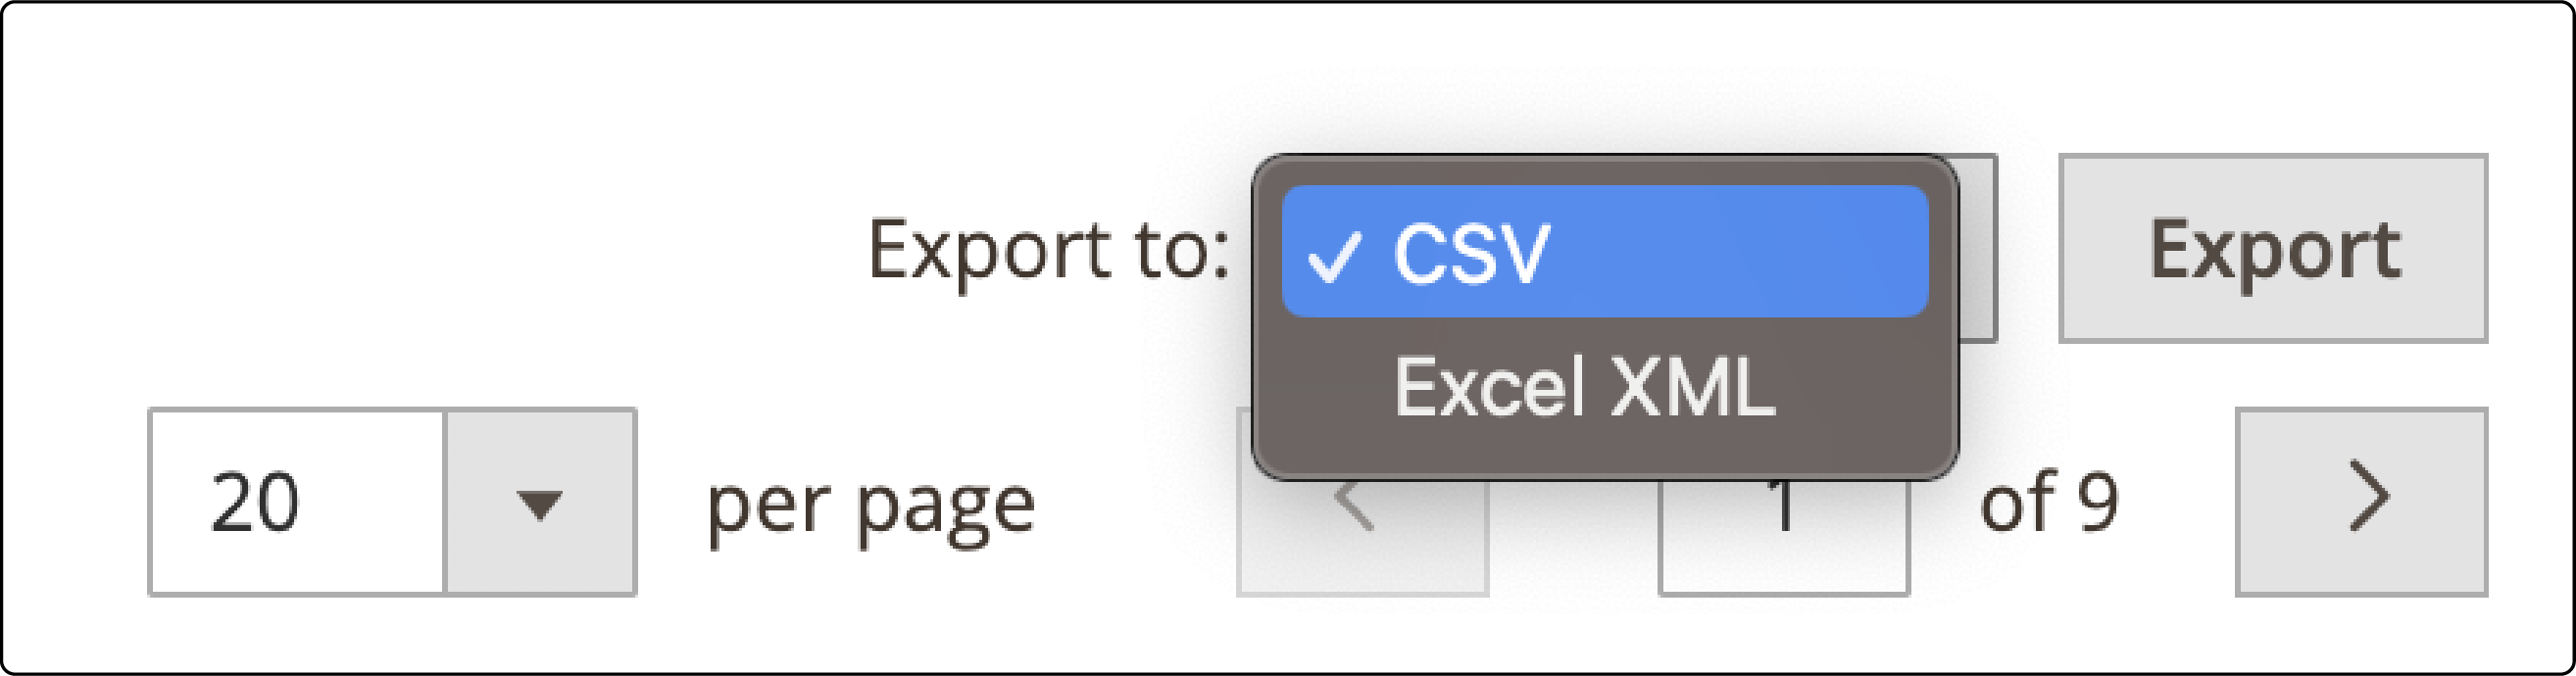 Exporting Admin Action Log Reports from Magento 2 as CSV or XML files for data analysis